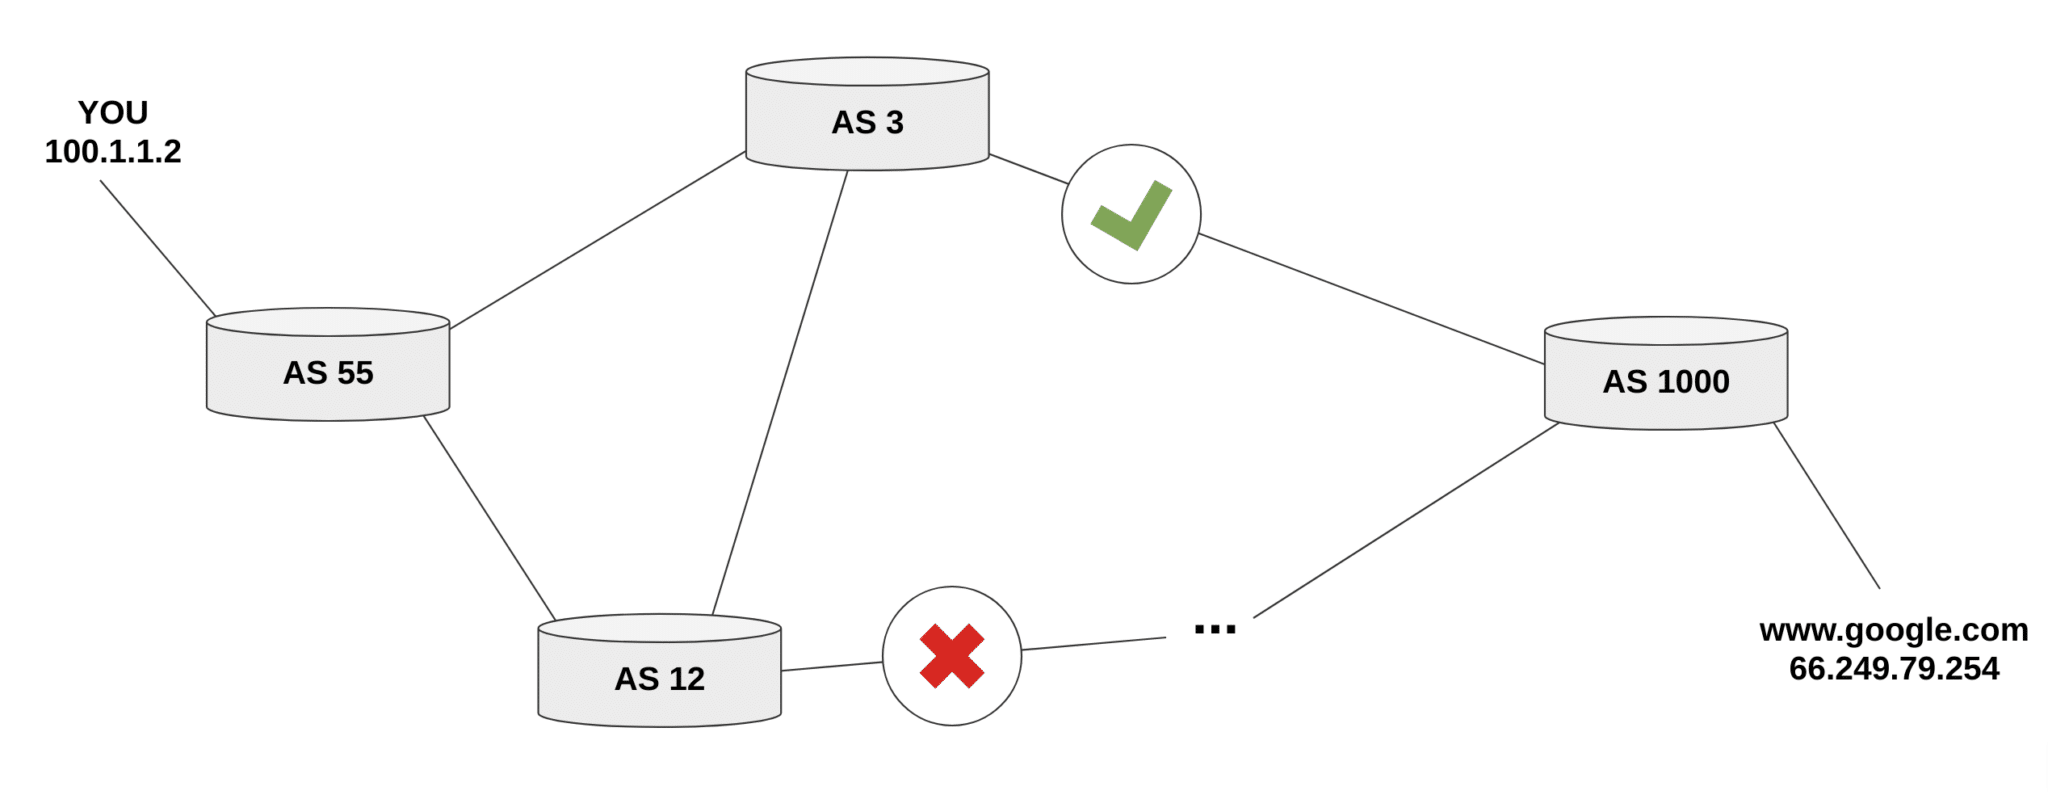 An example message passing relaying routing information.